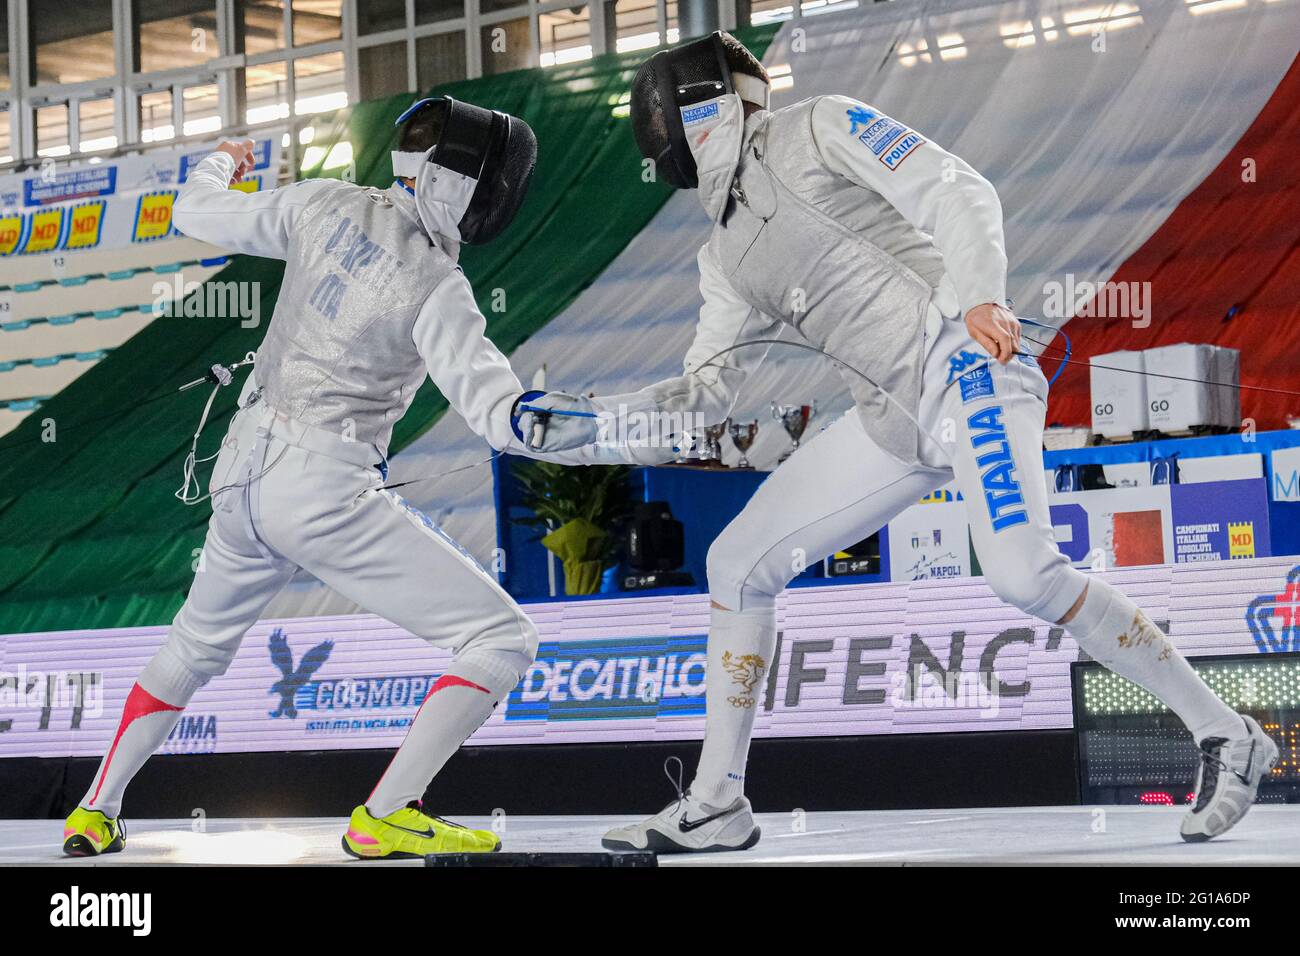 Damiano Rostalli (L) competes with Francesco Ingargiola in the men's foil  team final during the Italian Fencing Team Absolute Championships Stock  Photo - Alamy